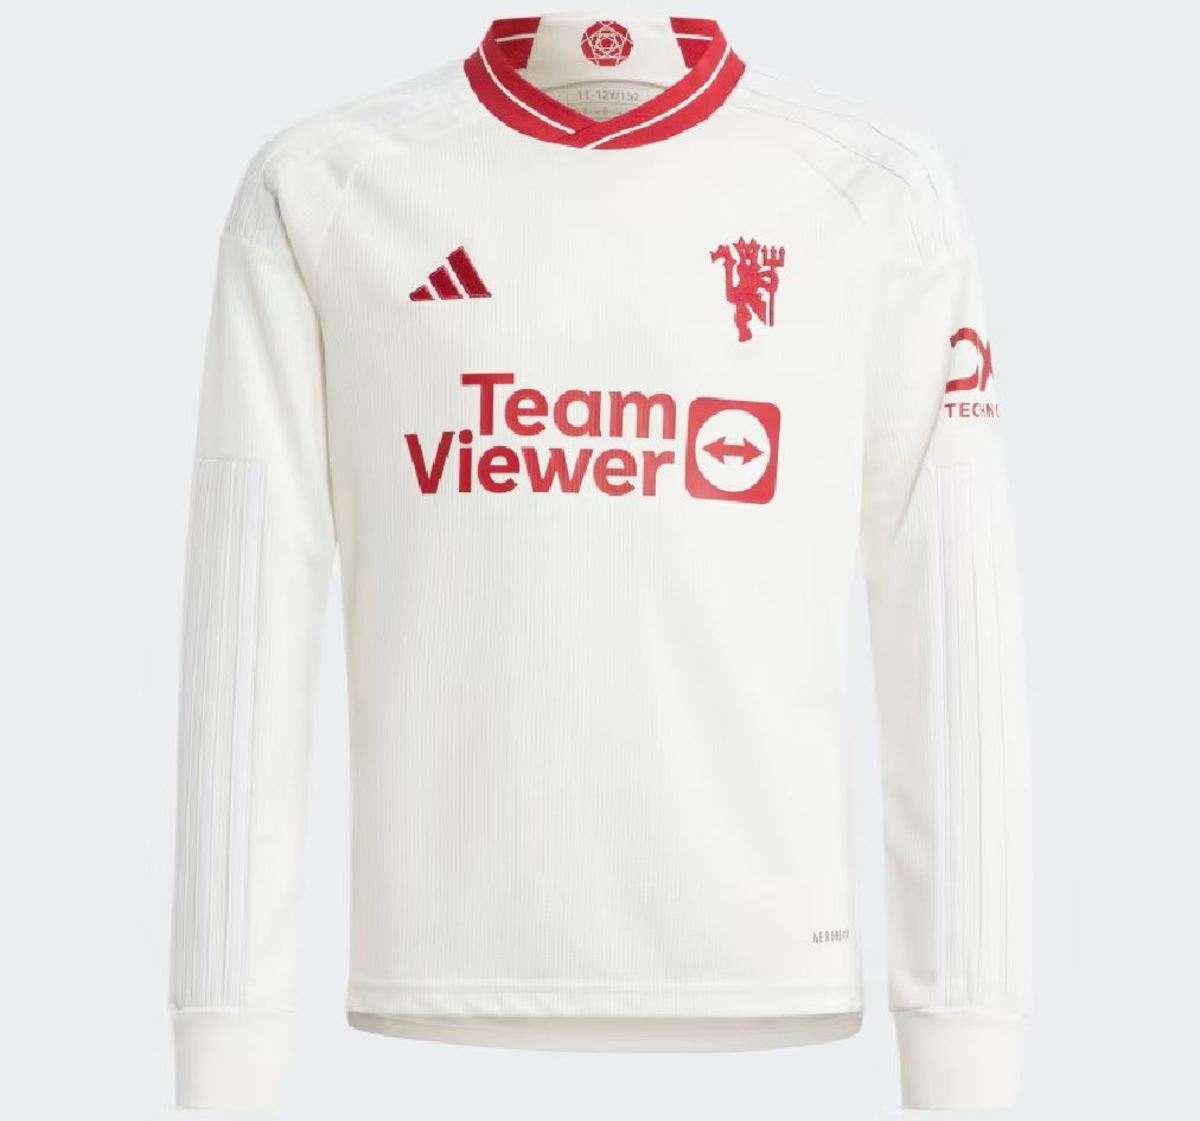 An image of Manchester United's third jersey for the 2023/24 season